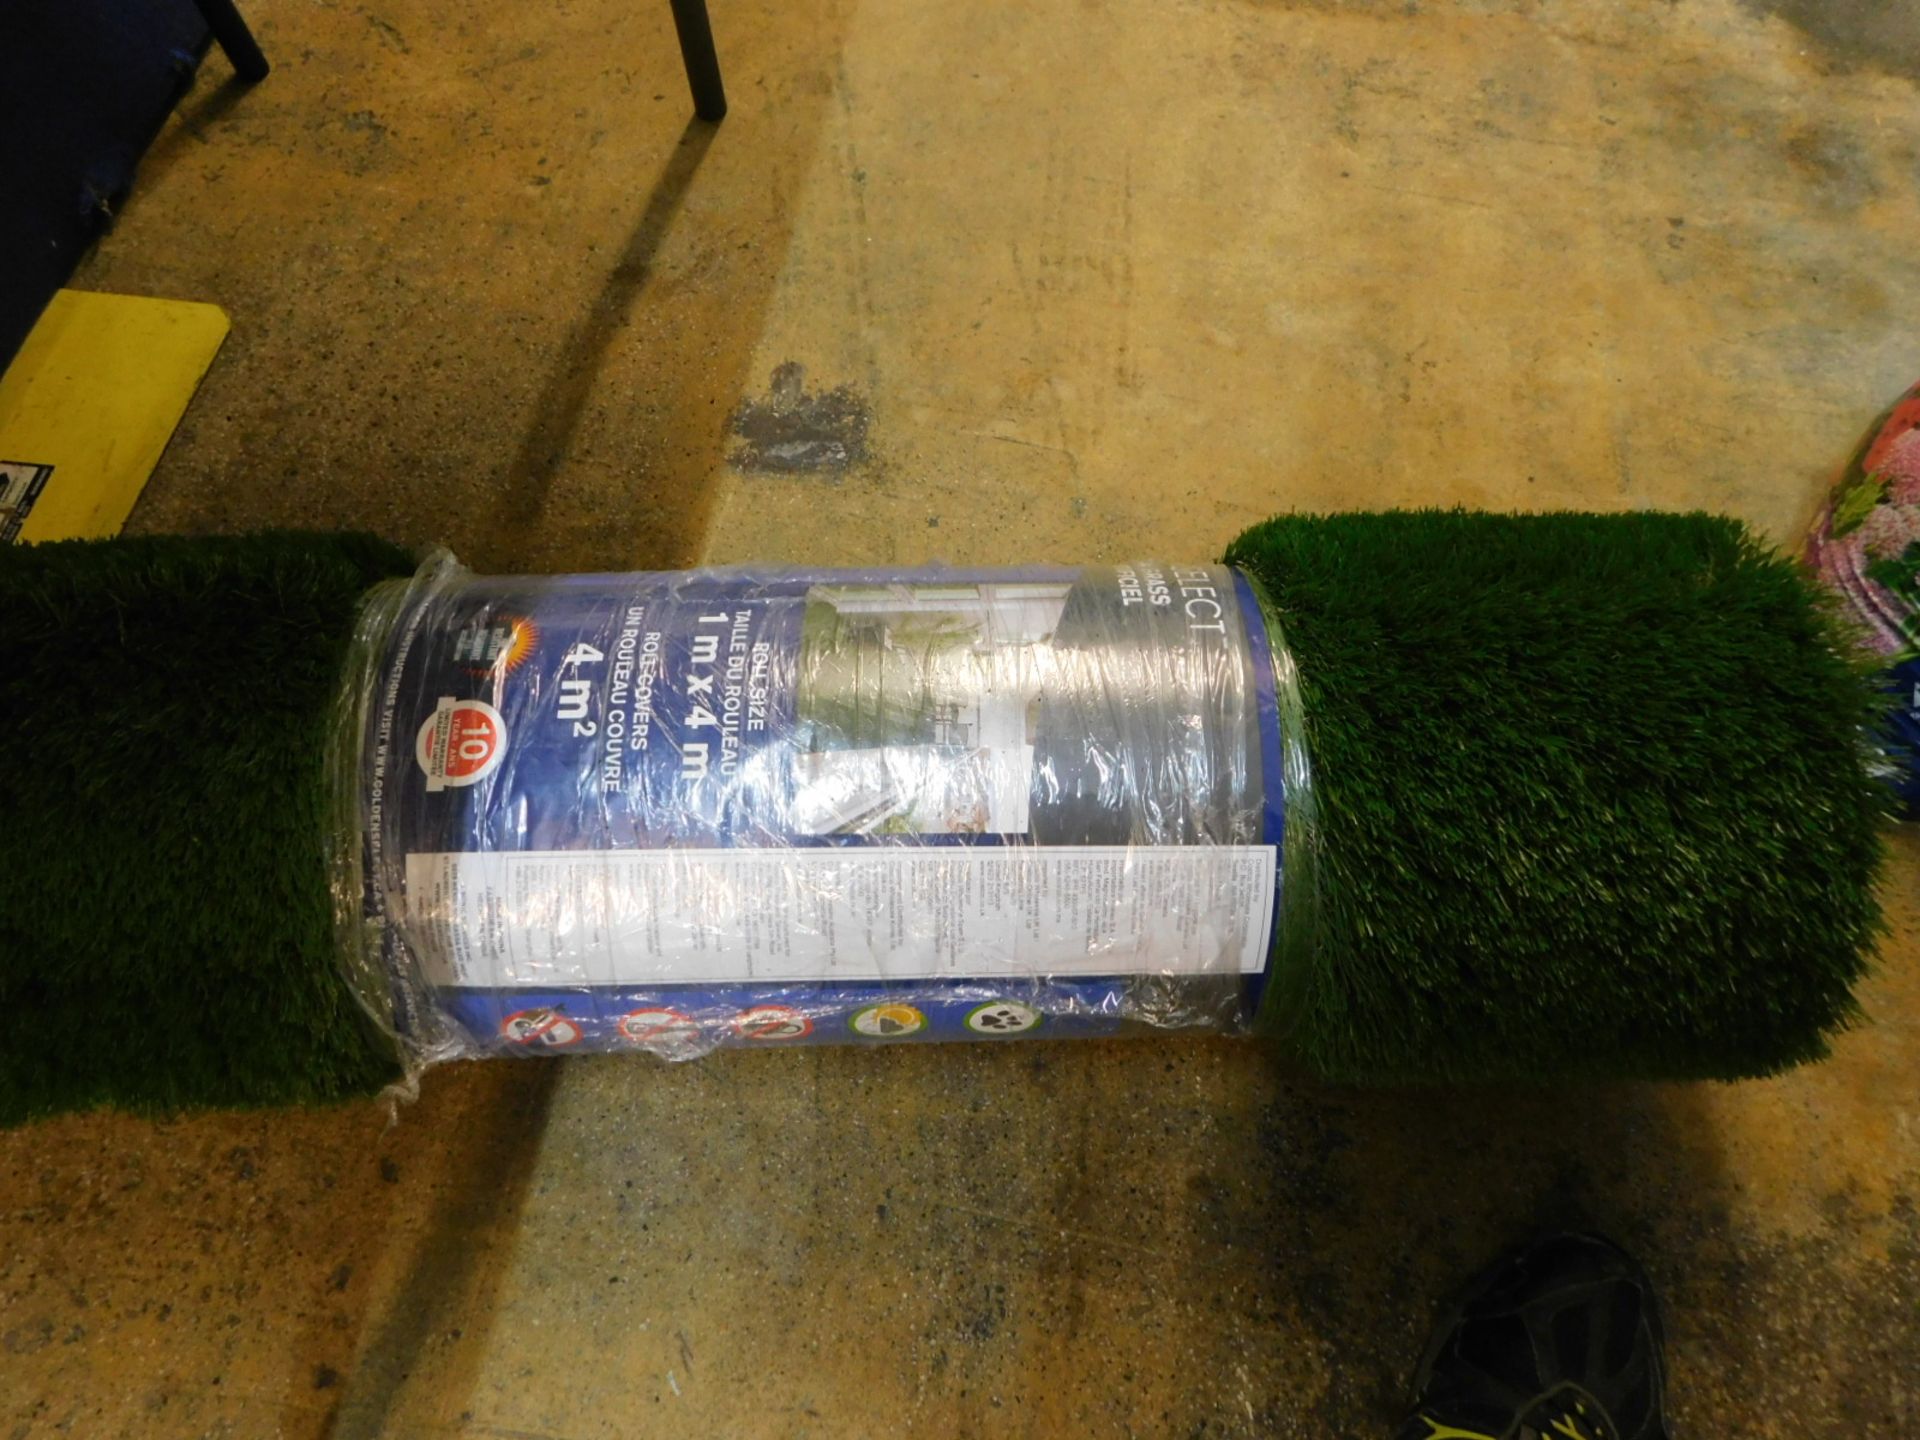 1 ROLL OF GOLDEN SELECT ARTIFICIAL GRASS 1M X 4M (COVERS 4M SQ) RRP £199.99